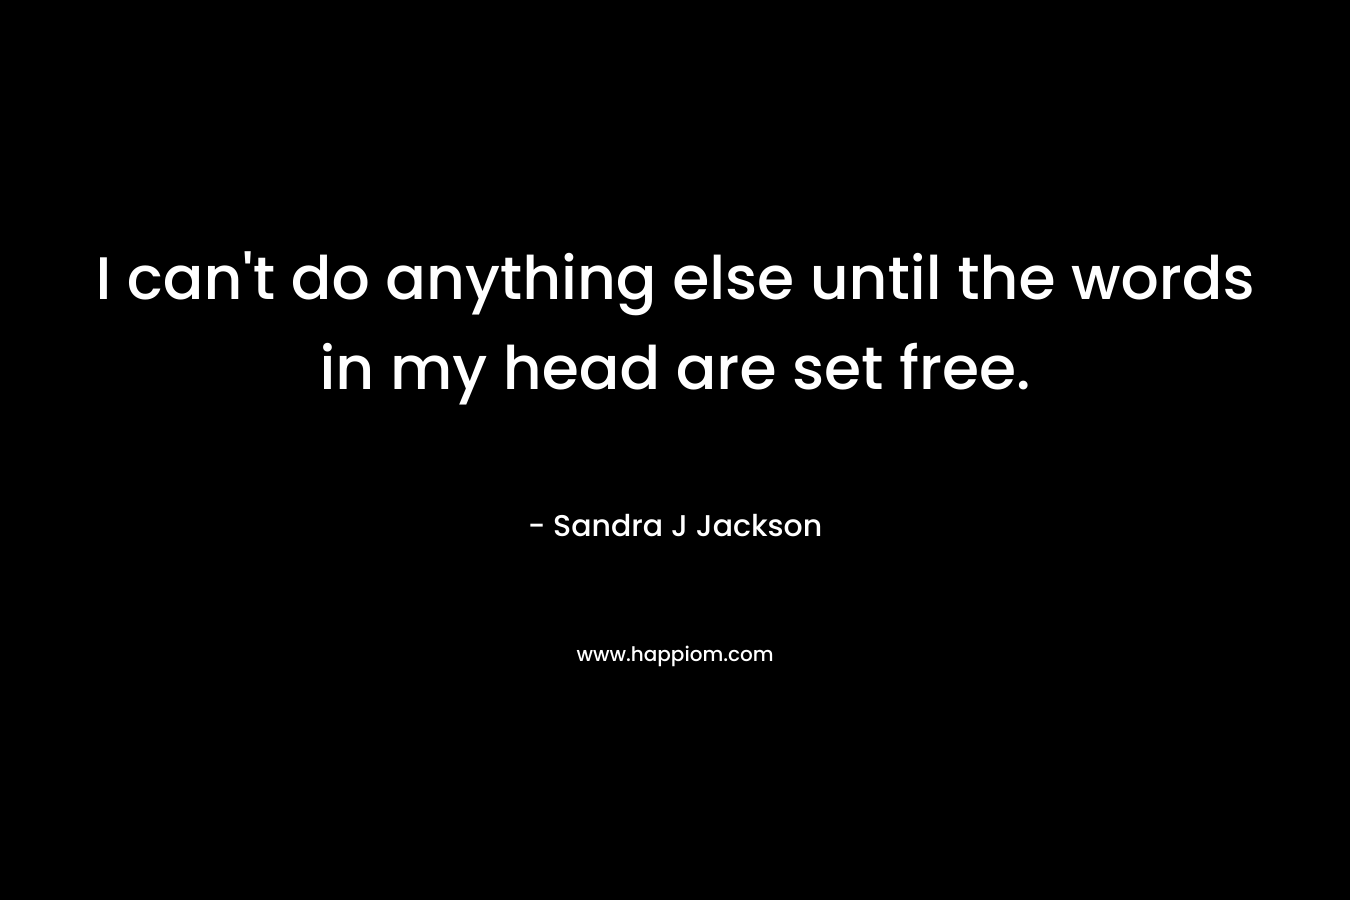 I can’t do anything else until the words in my head are set free. – Sandra J Jackson